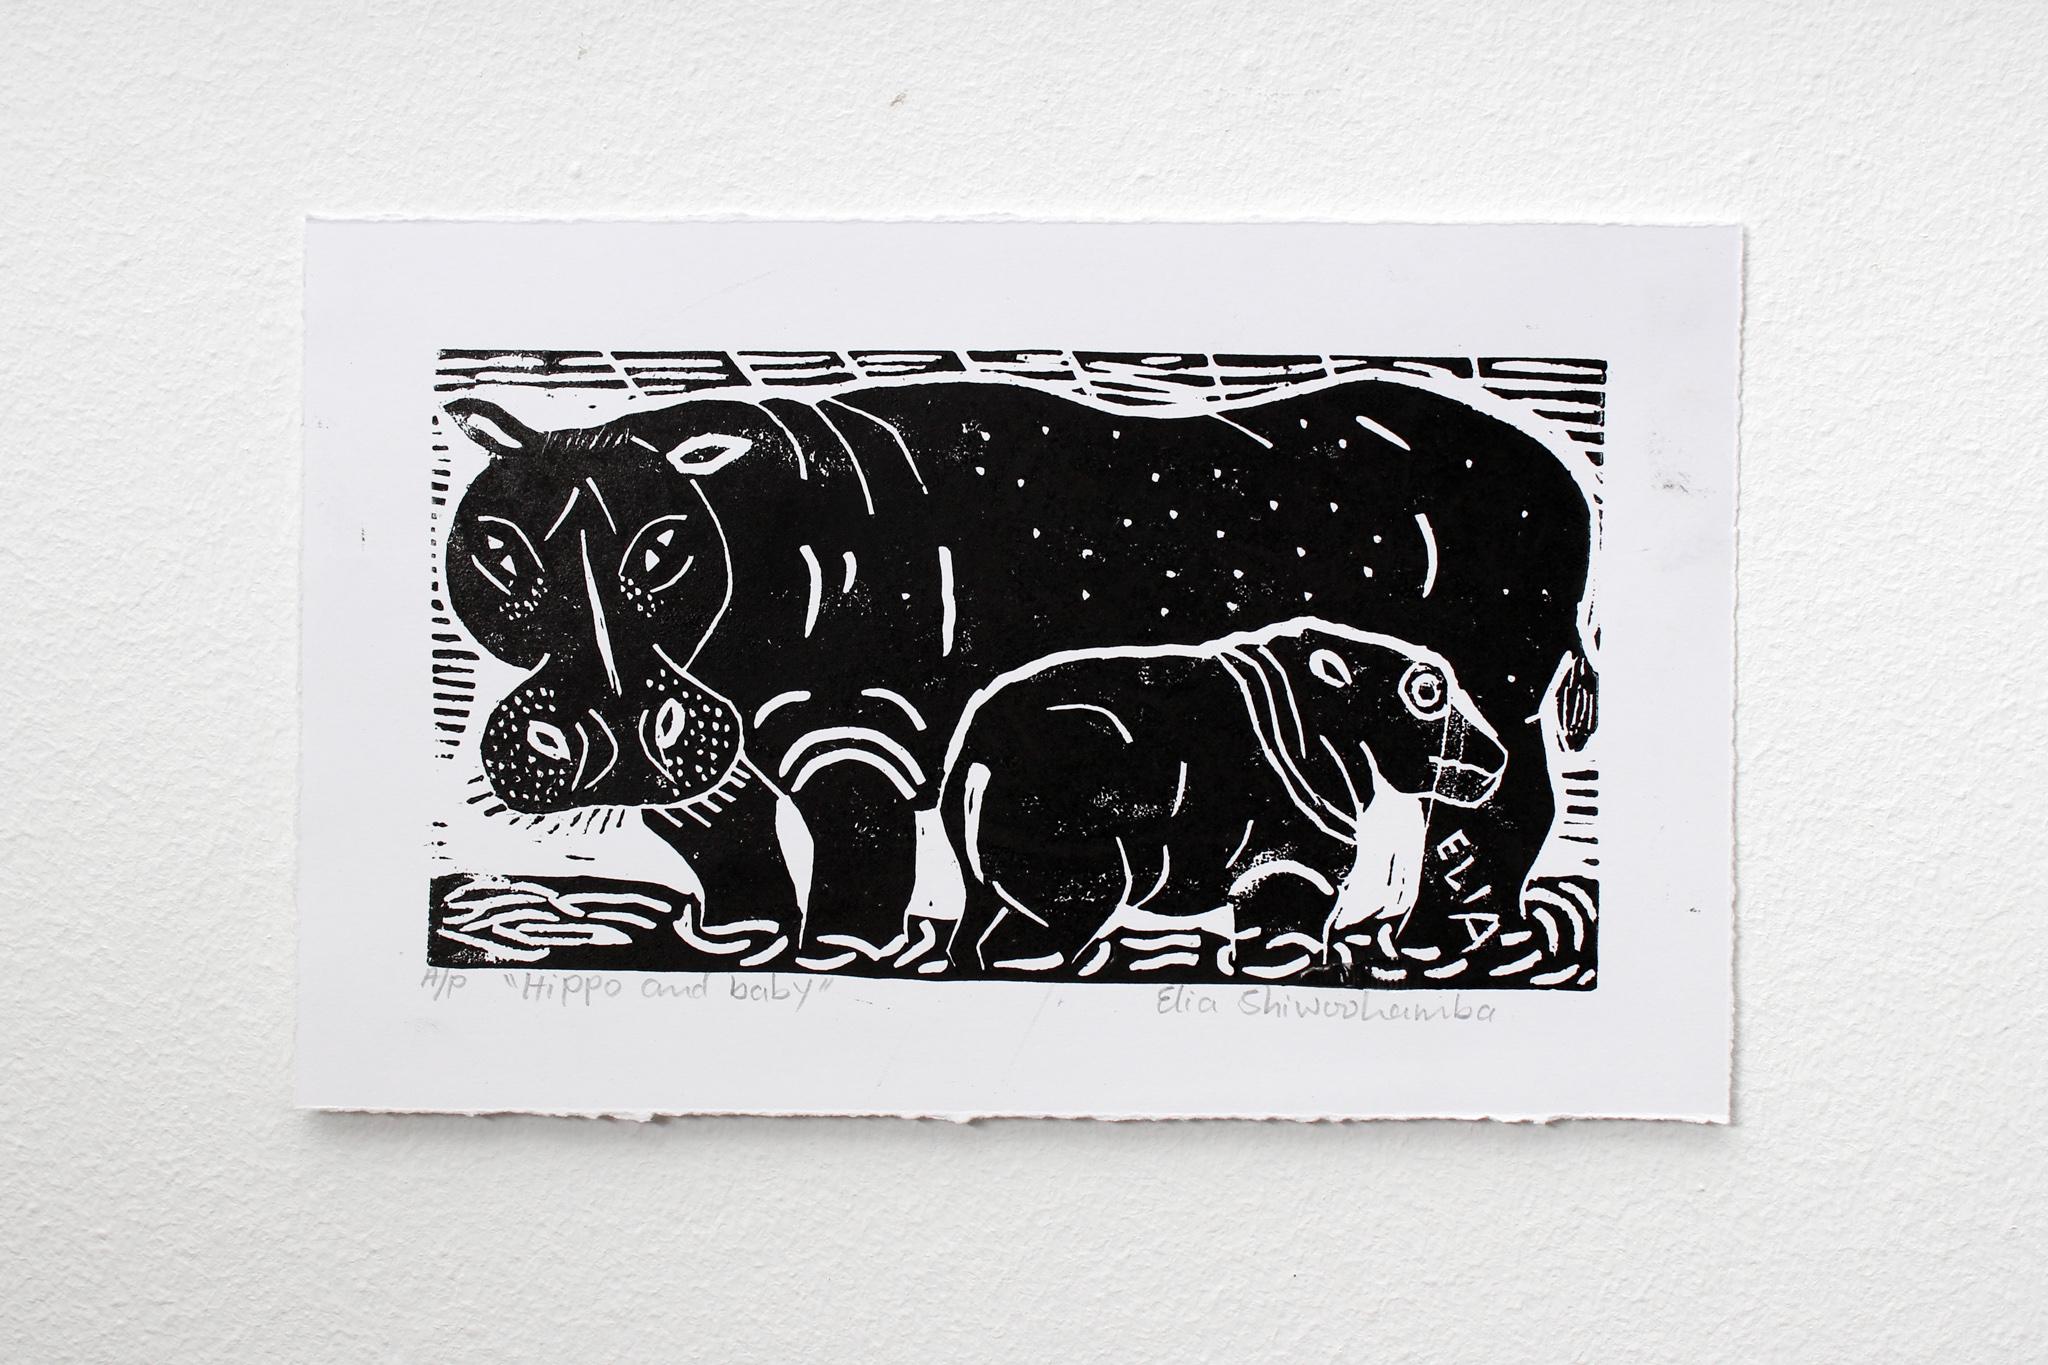 Hippo and baby, Linoleum block prints on paper.

Elia Shiwoohamba was born in 1981 in Windhoek, Namibia. He graduated from the John Muafangejo Art Centre in Windhoek in 2006. Specialising in printmaking and sculpture, Shiwoohamba works as a